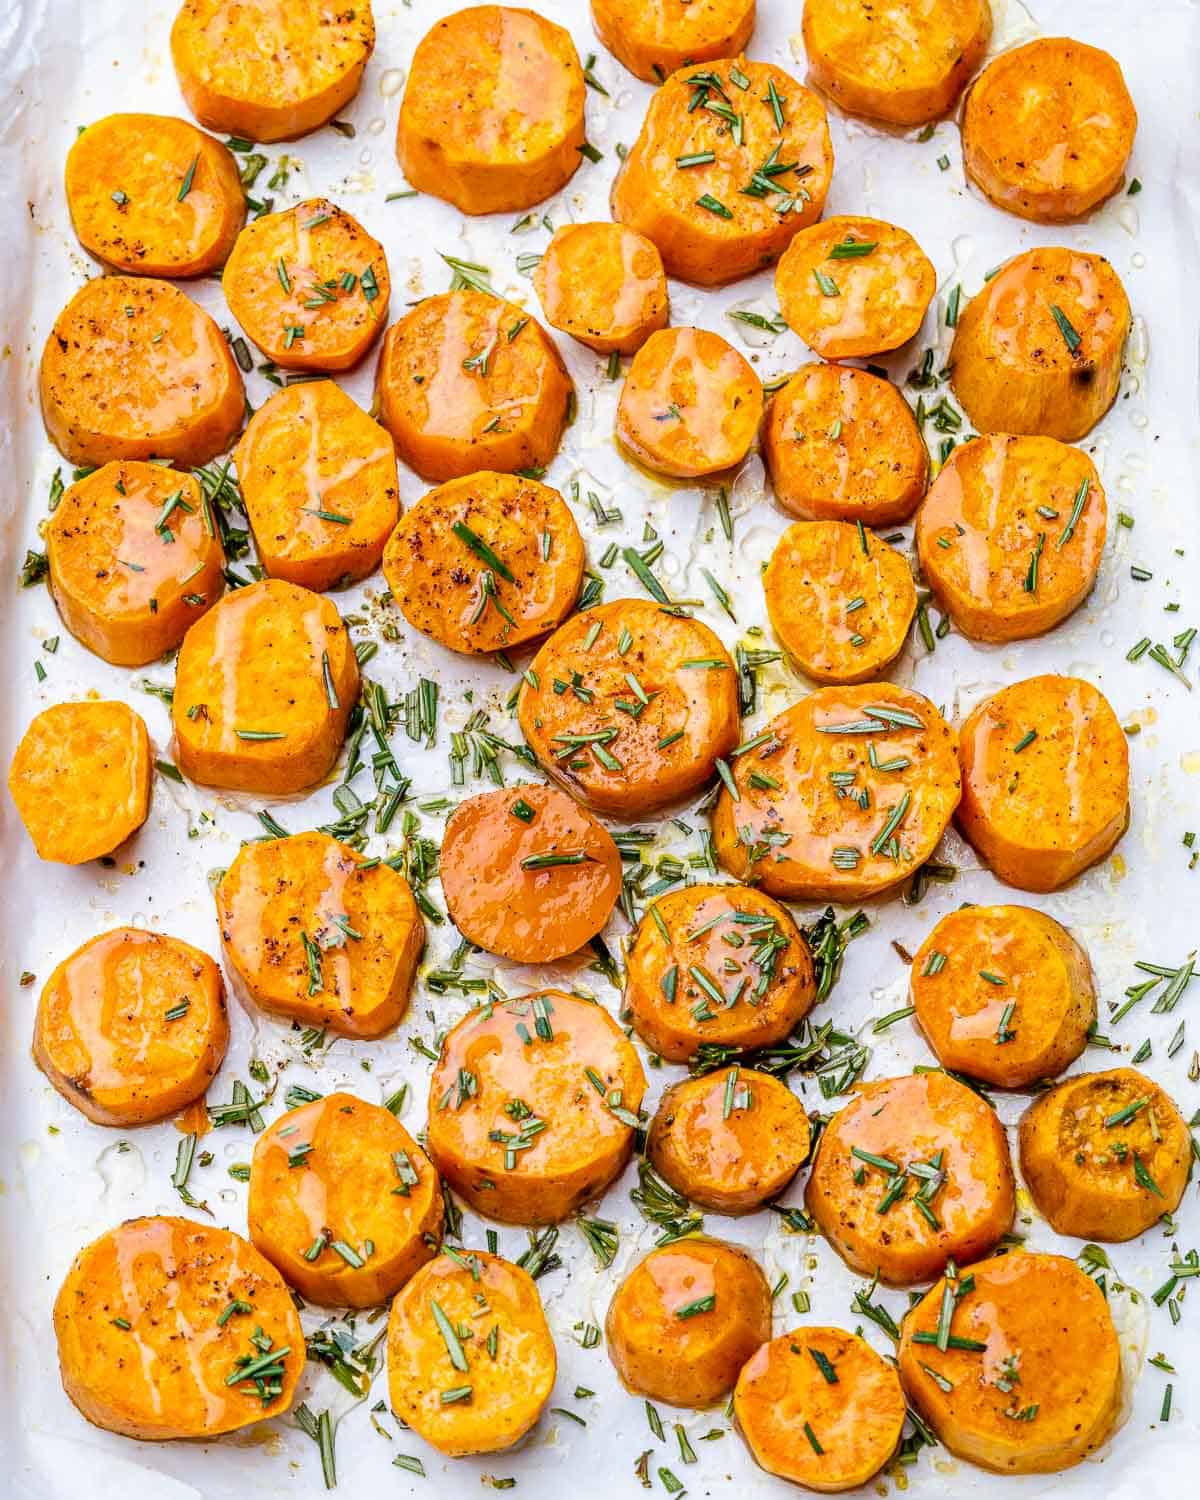 Sweet potato rounds drizzled with honey and garnished with rosemary on a pan.